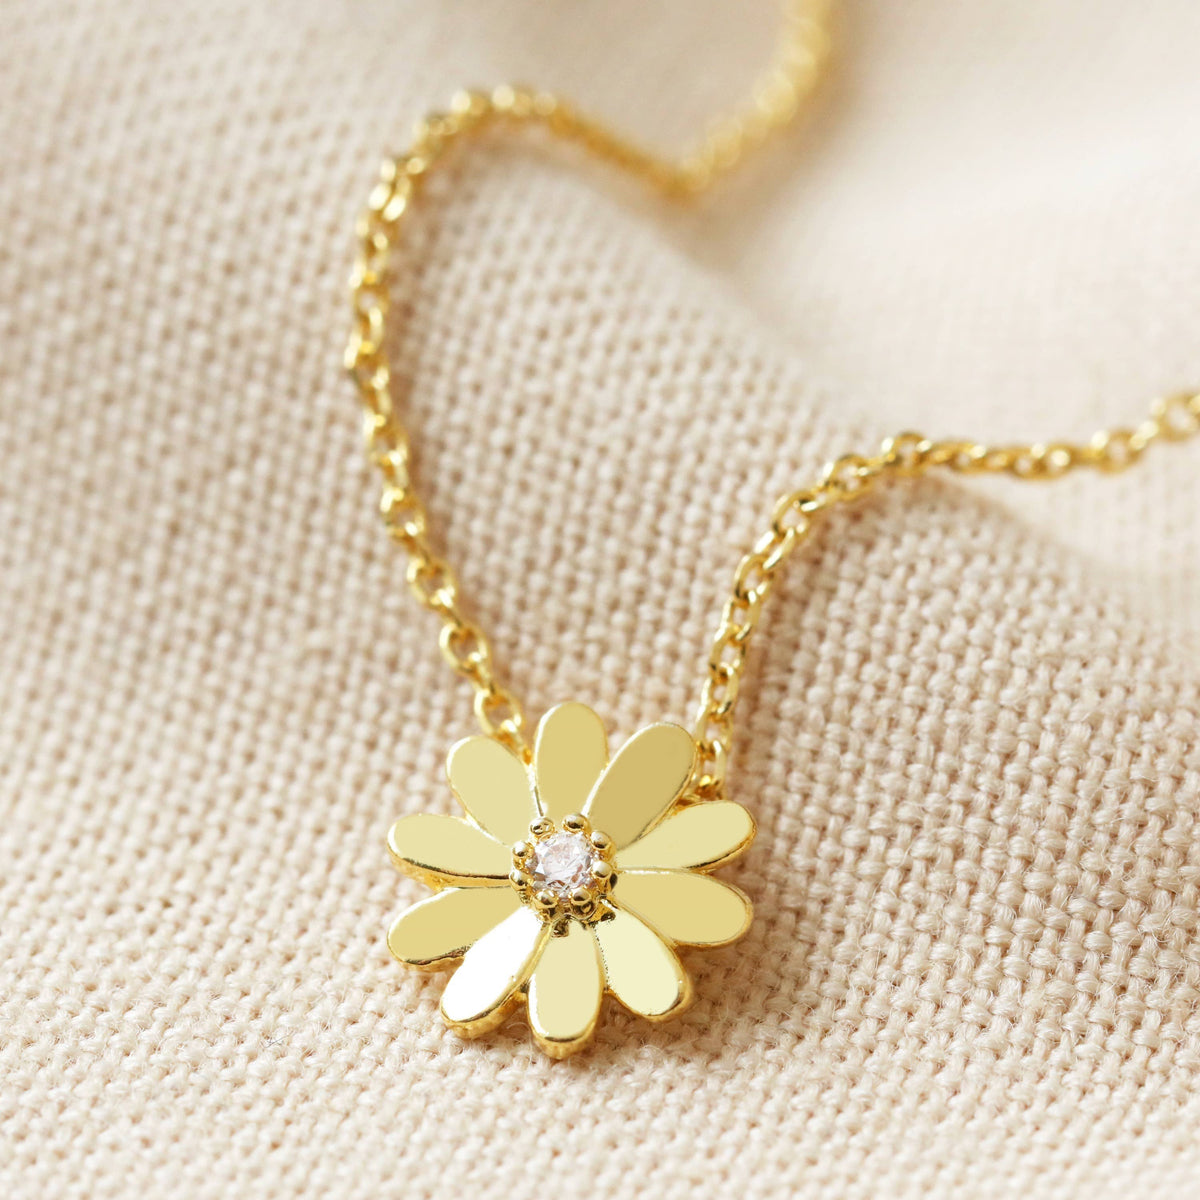 Lisa Angel Accessories Daisy Charm Necklace in Gold